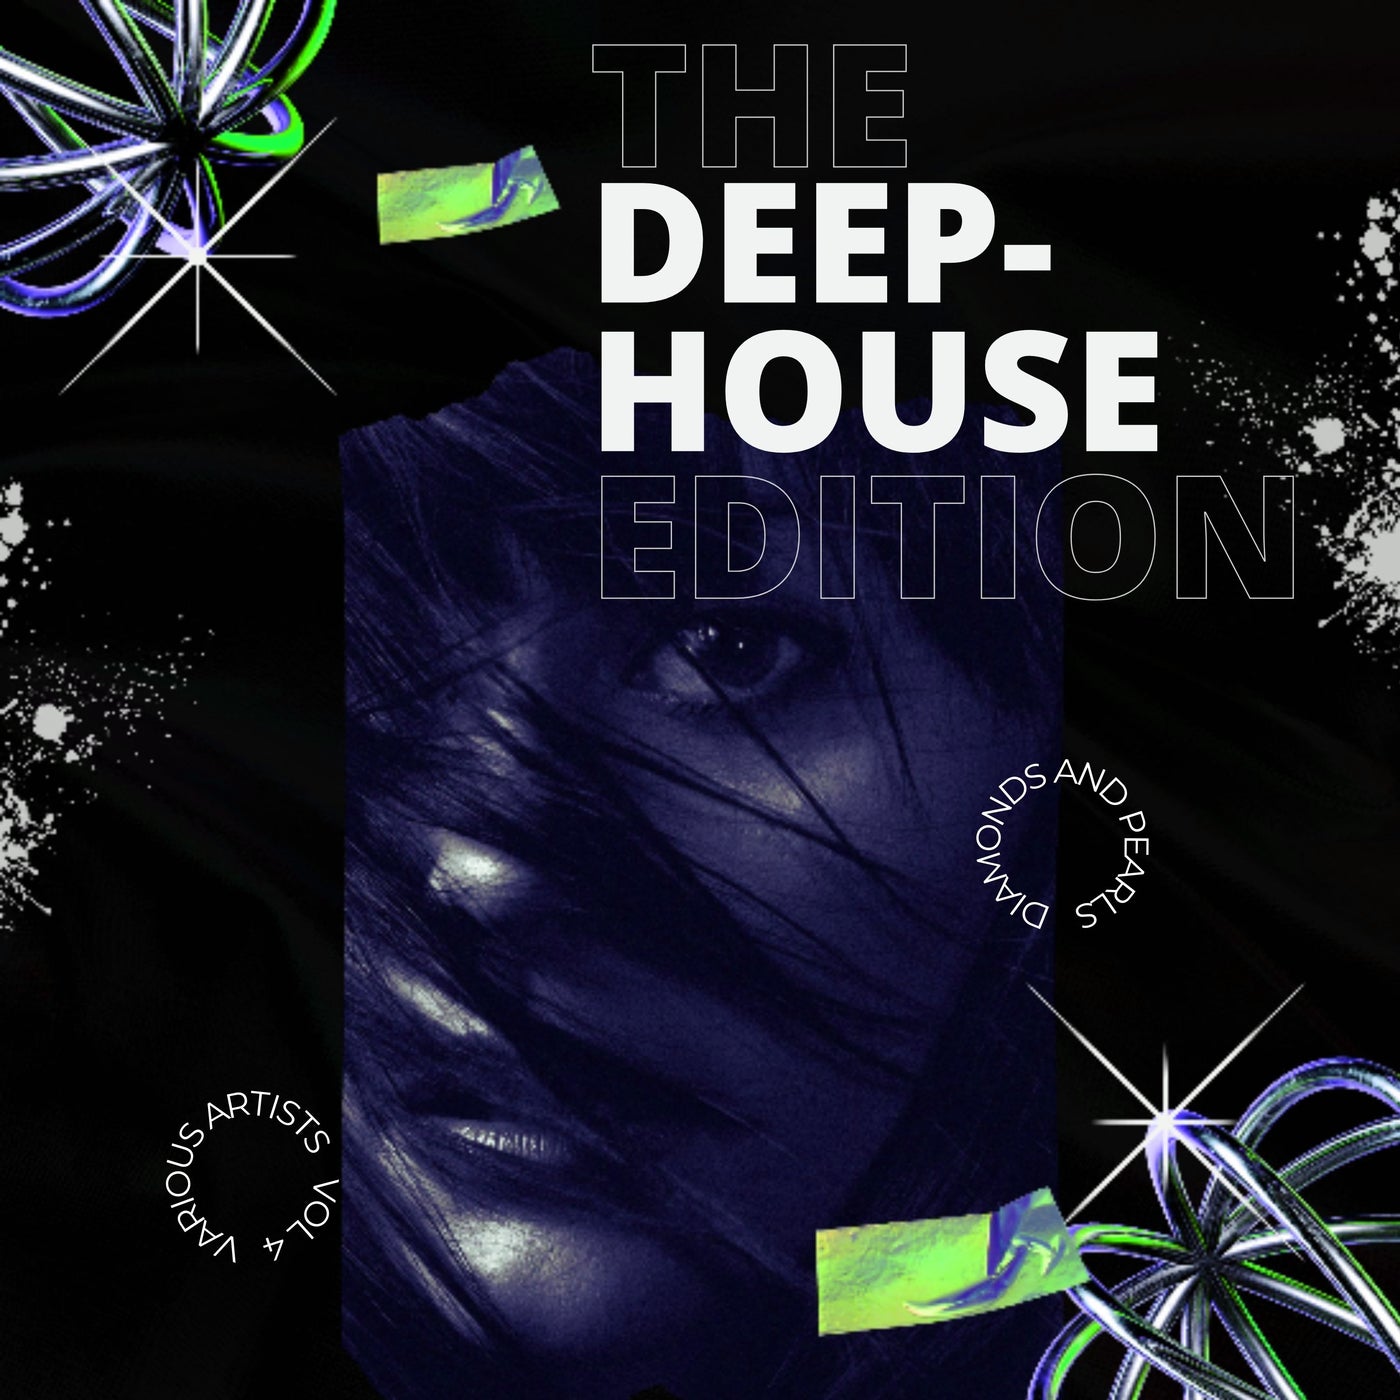 Diamonds and Pearls (The Deep-House Edition), Vol. 4